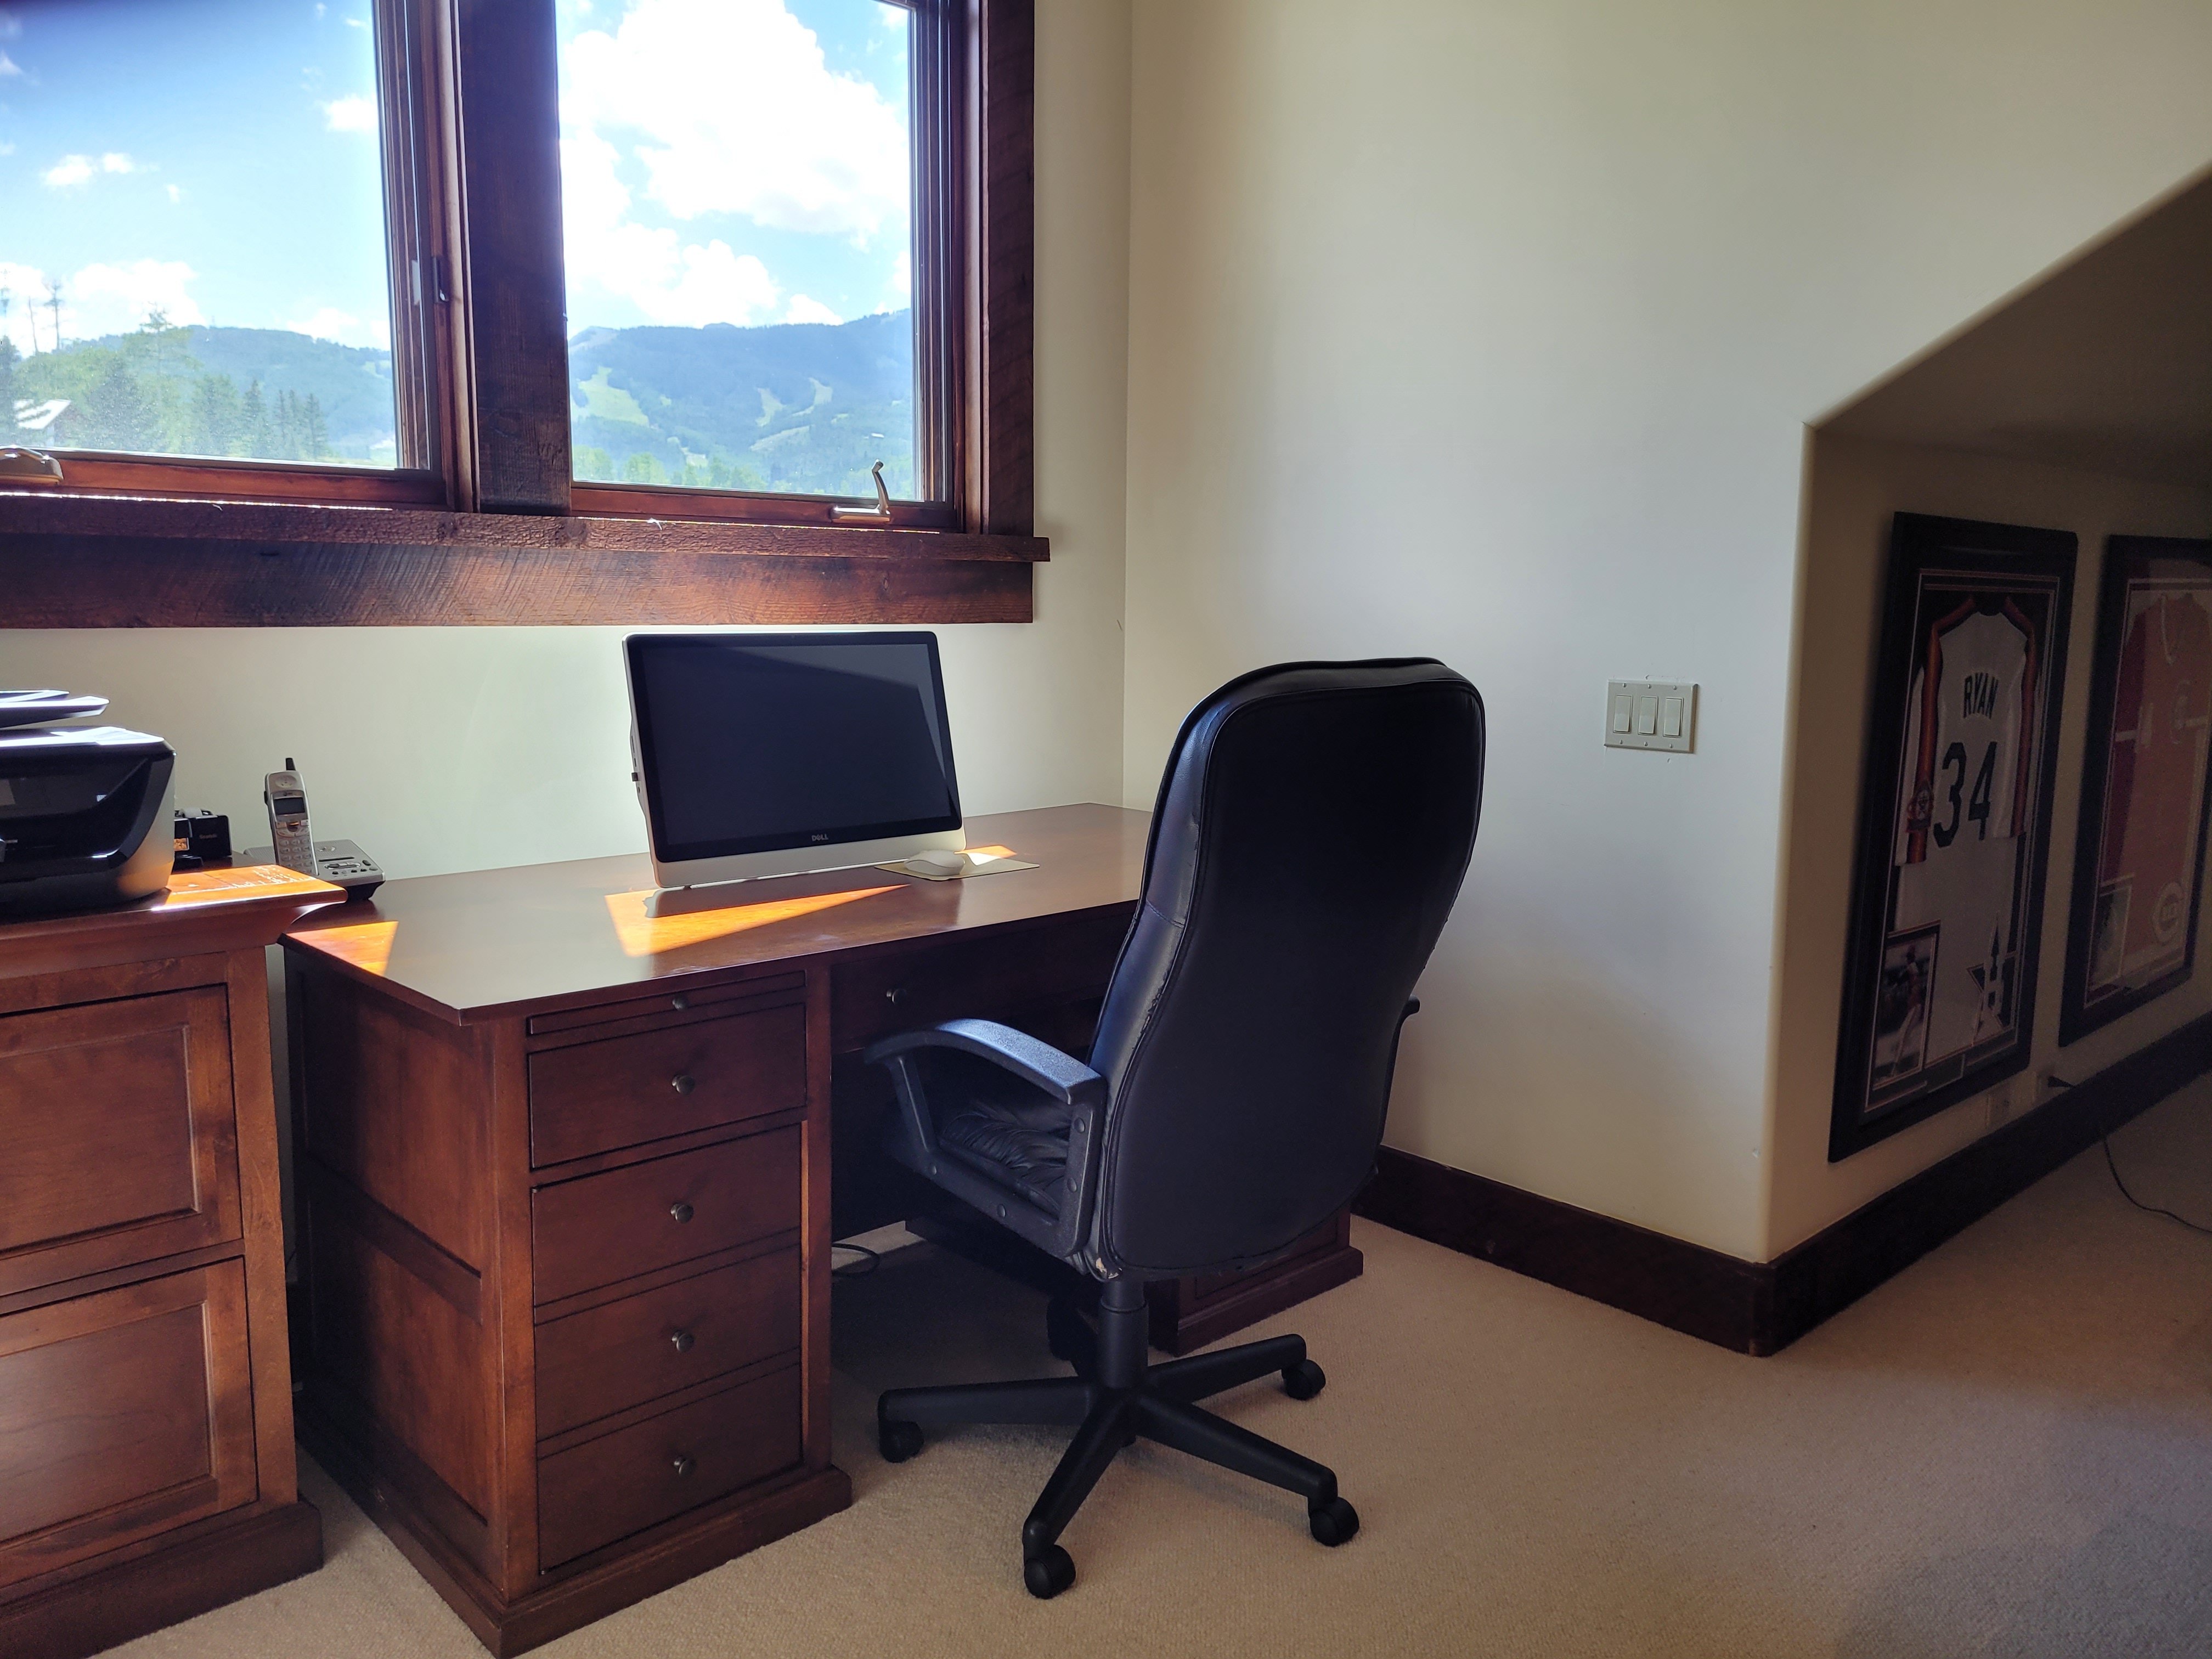 Office with wood desk and office chairs